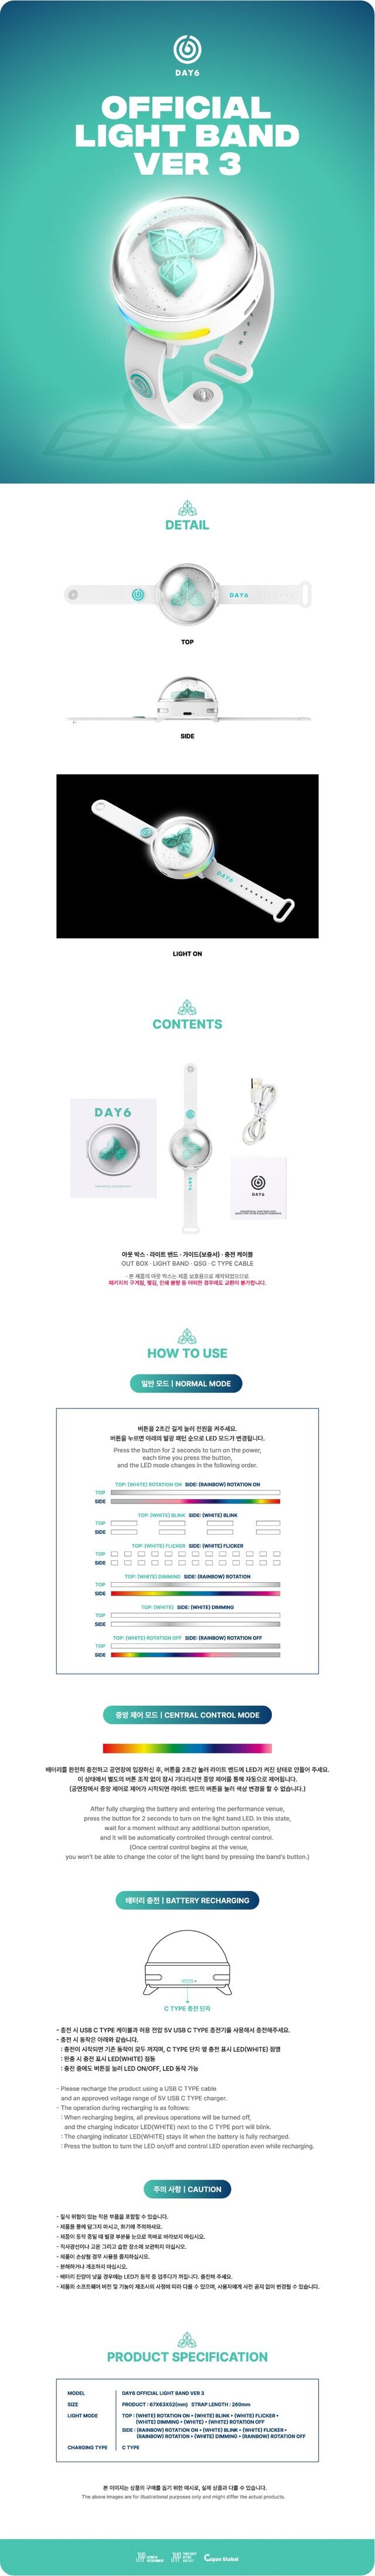 [PREORDER] DAY6 - OFFICIAL LIGHT BAND VER 3